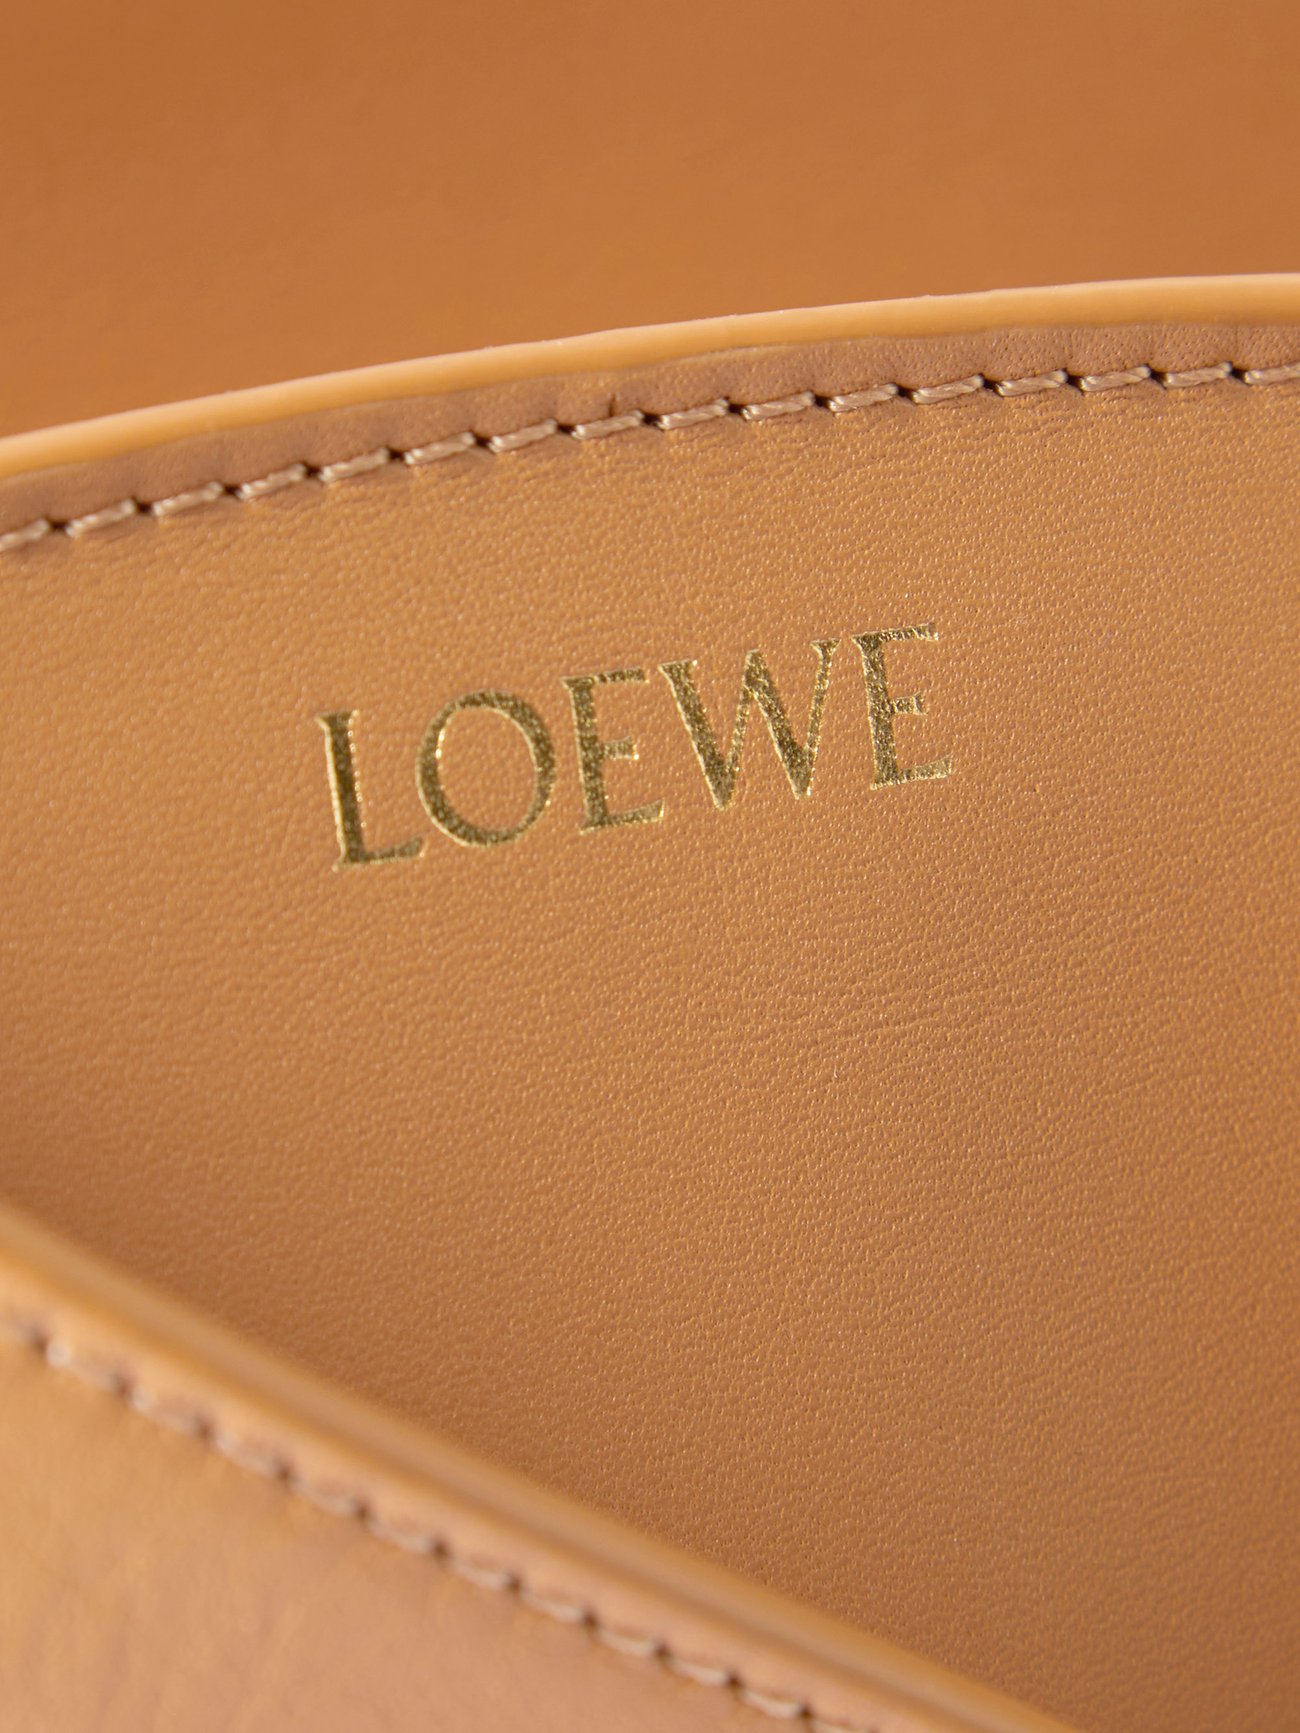 Loewe Women's Paseo Small Leather Shoulder Bag